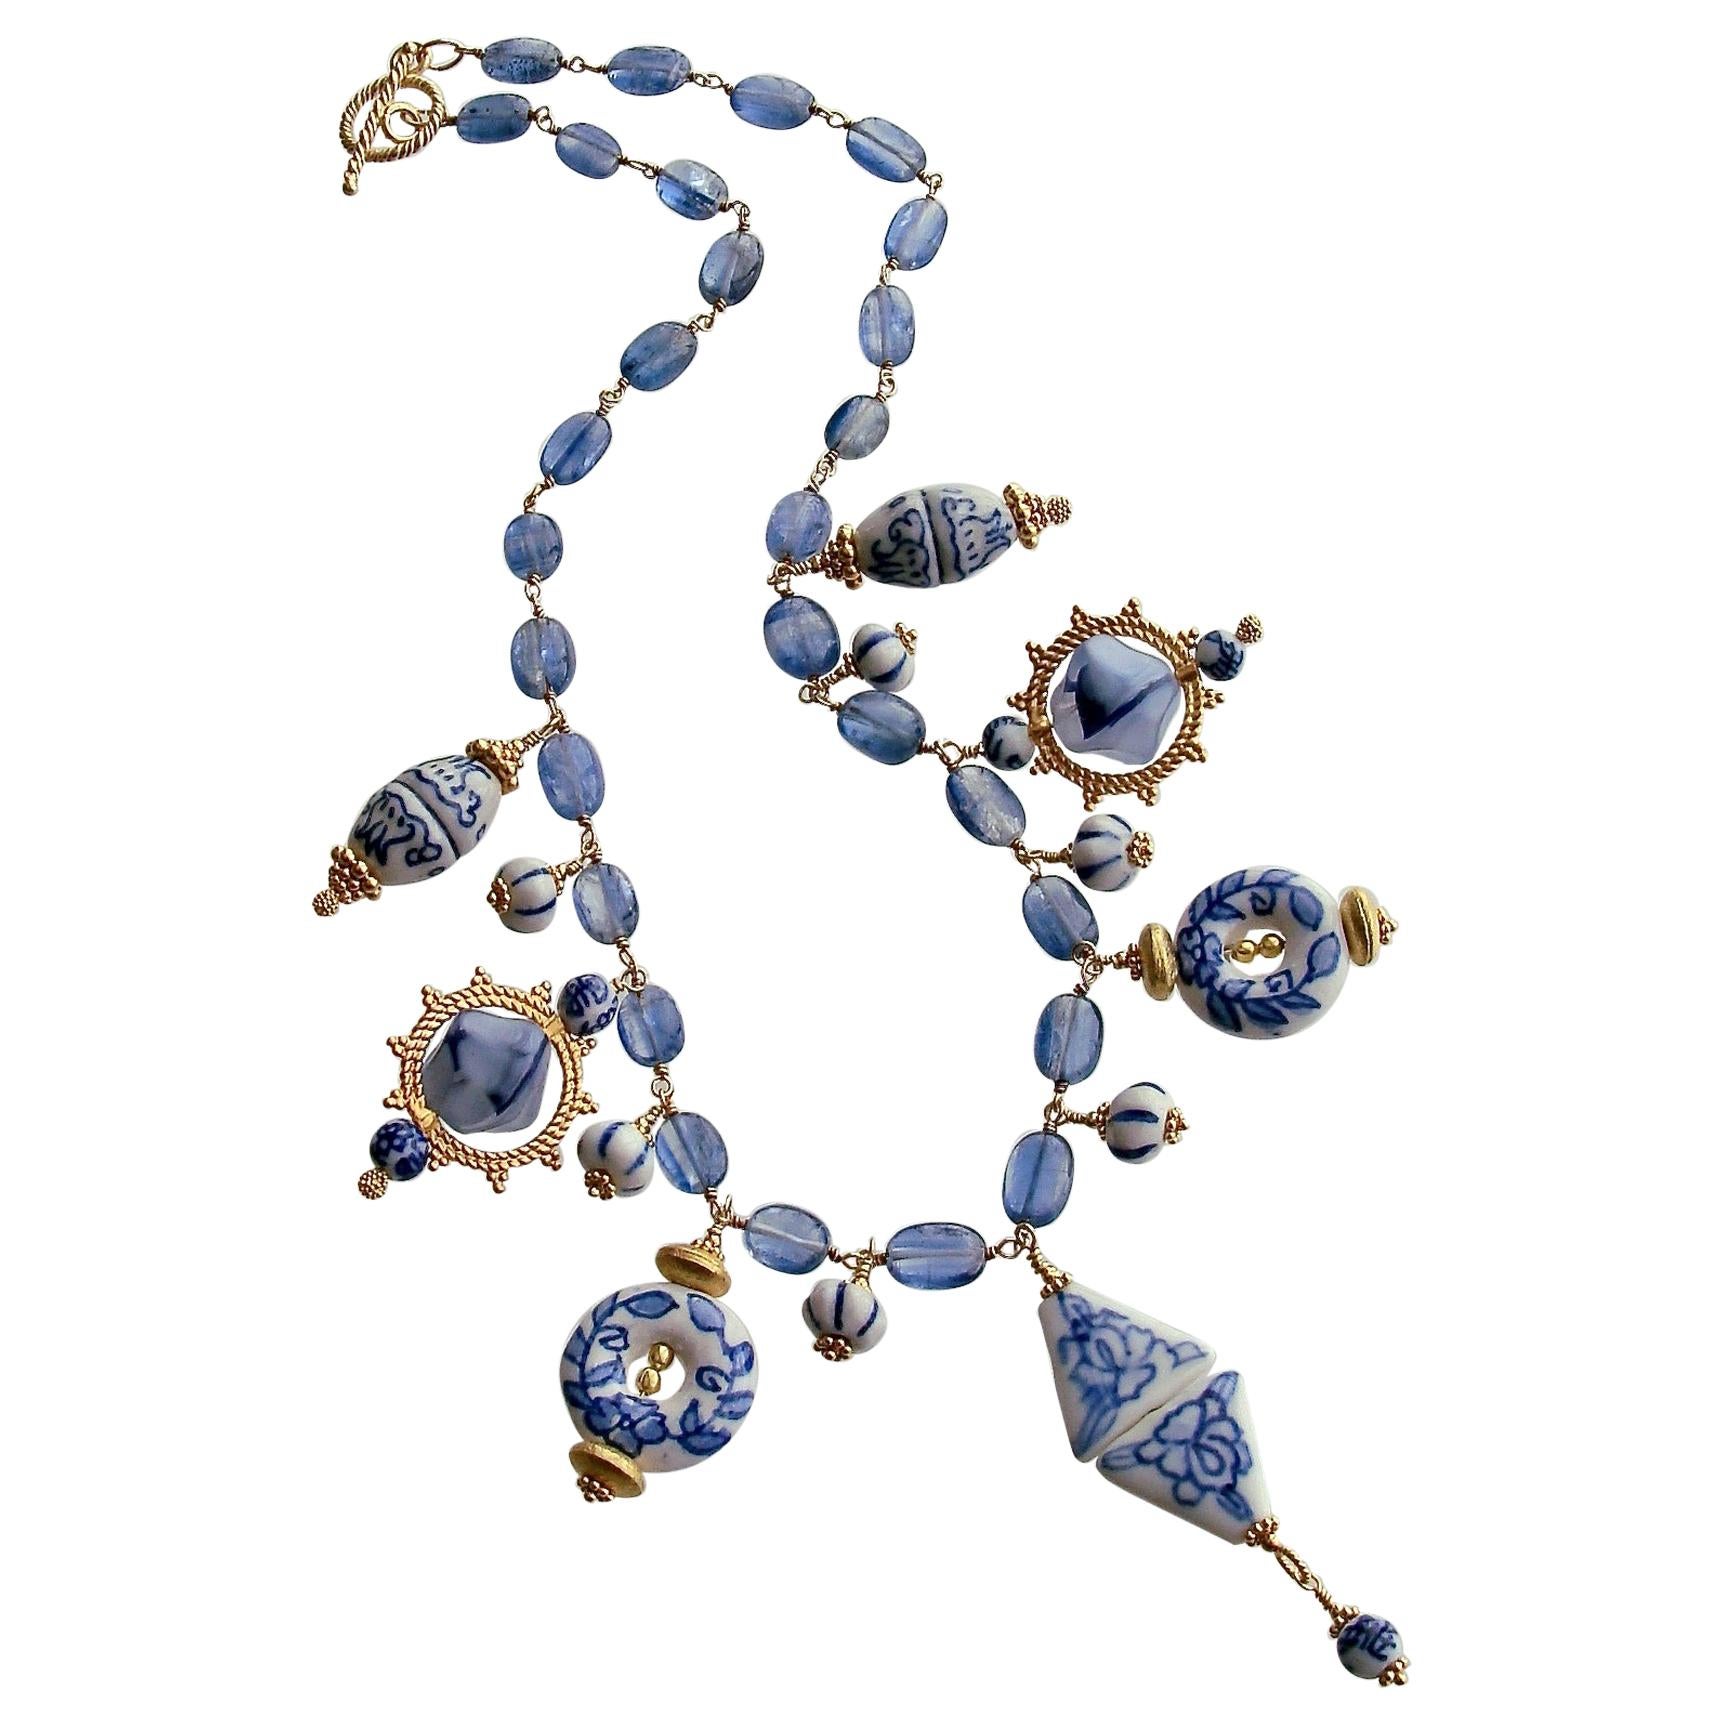 Kyanite Blue White Porcelain Bead Charm Necklace, Bluebelle II Necklace